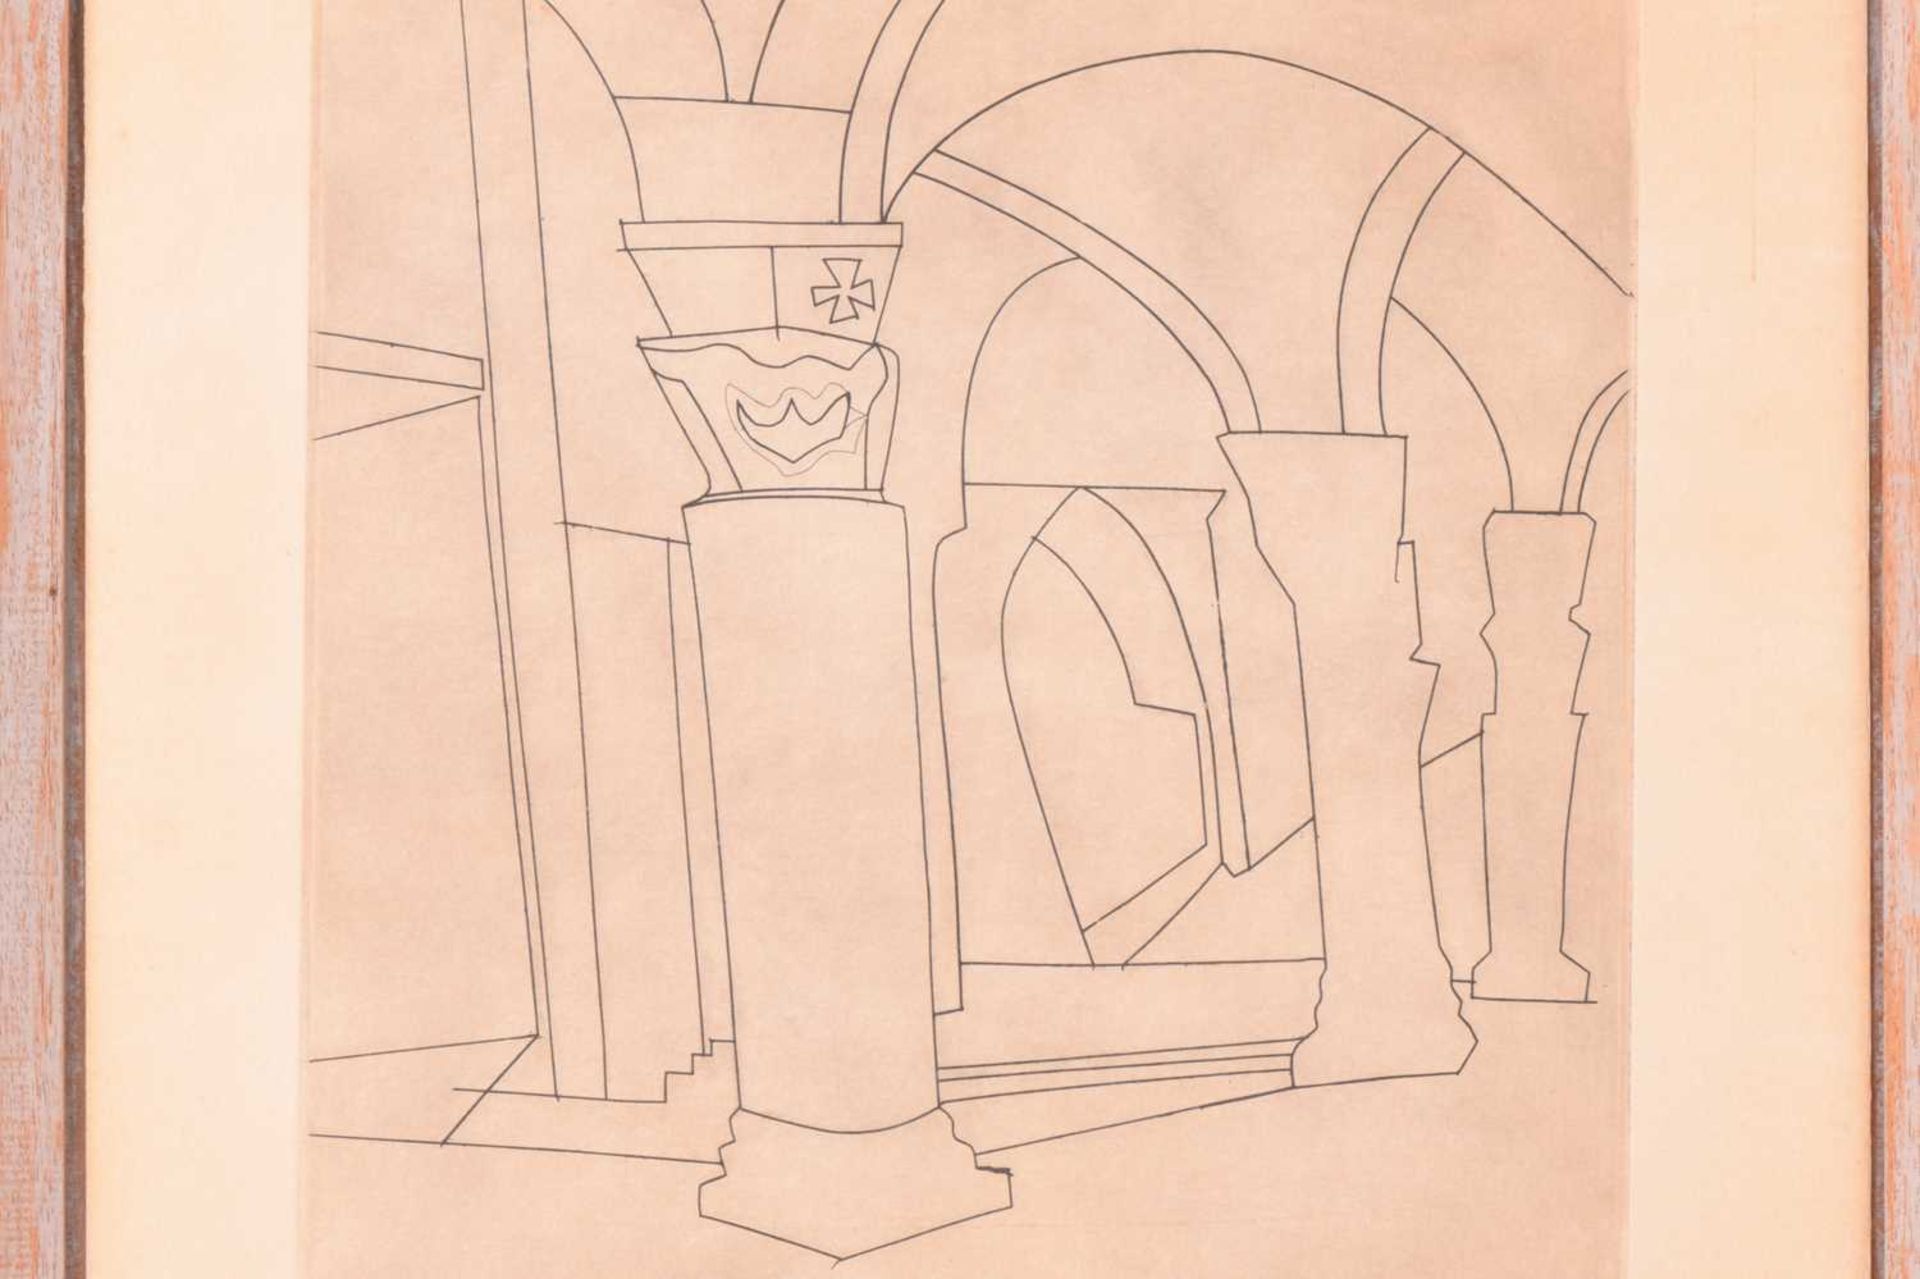 Ben Nicholson (1894 - 1982), Aquileia, signed and dated 65 in pencil, titled and inscribed - Image 3 of 13